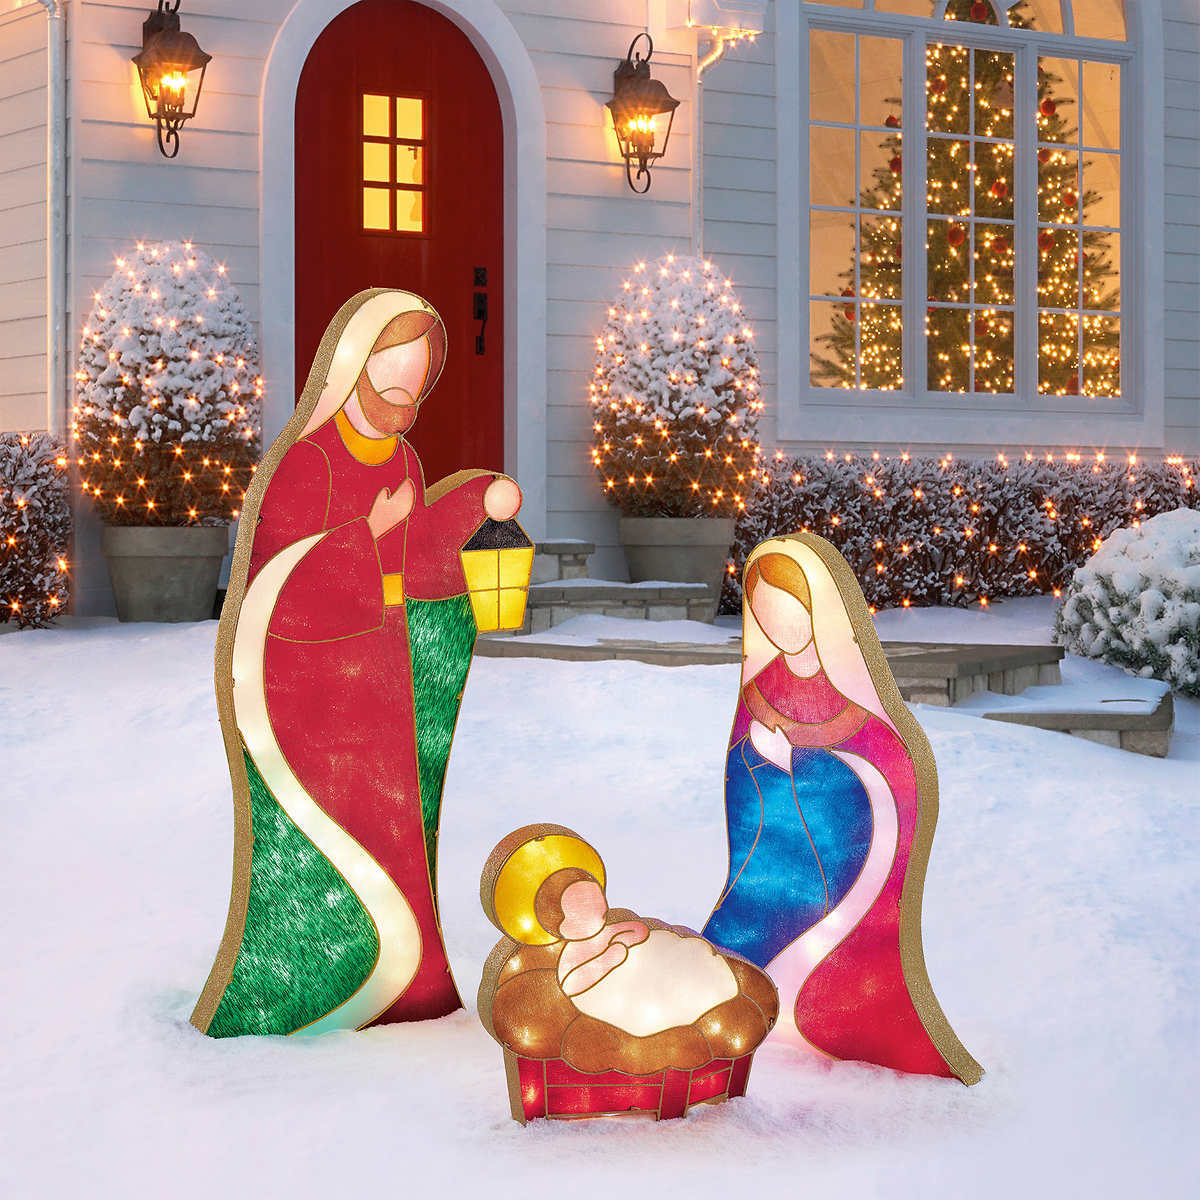 4ft 8 Inch (1.42 m) Indoor / Outdoor Christmas Nativity Scene with 240 LED lights